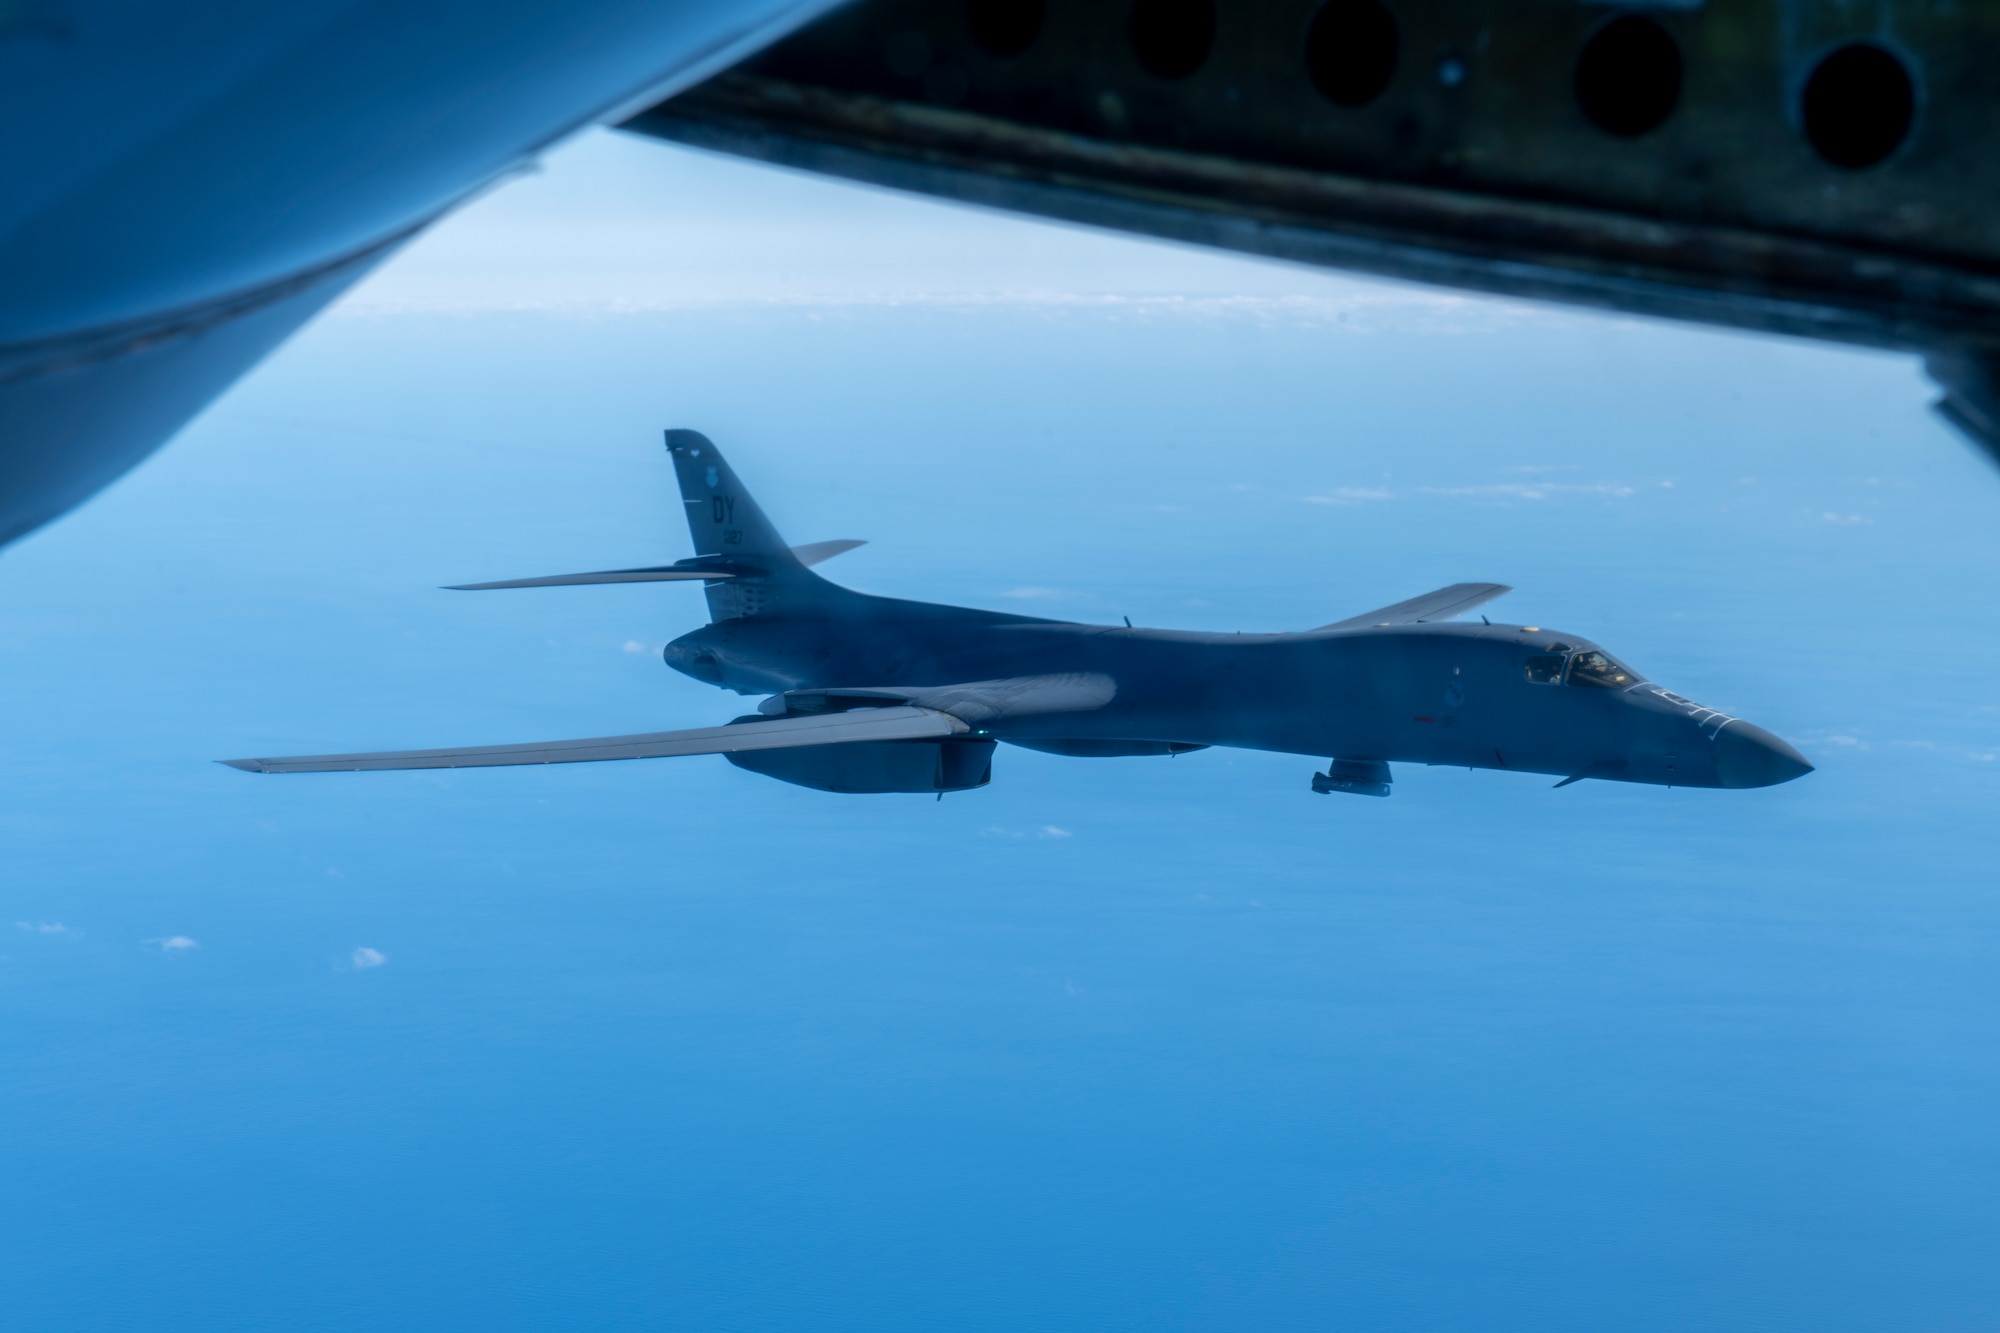 A B-1 Lancer from the 7th Bomb Wing departs after receiving fuel over the Pacific Ocean during a Bomber Task Force deployment, Jan. 11, 2022. A BTF deployment of U.S. Air Force B-1 Lancers, Airmen and support equipment from the 7th Bomb Wing, Dyess Air Force Base, Texas, coordinated with the 909th Air Refueling Squadron to support Pacific Air Forces’ training efforts with allies, partners, and joint forces and strategic deterrence missions to reinforce the rules-based international order in the Indo-Pacific region. (U.S. Air Force photo by Airman 1st Class Moses Taylor)